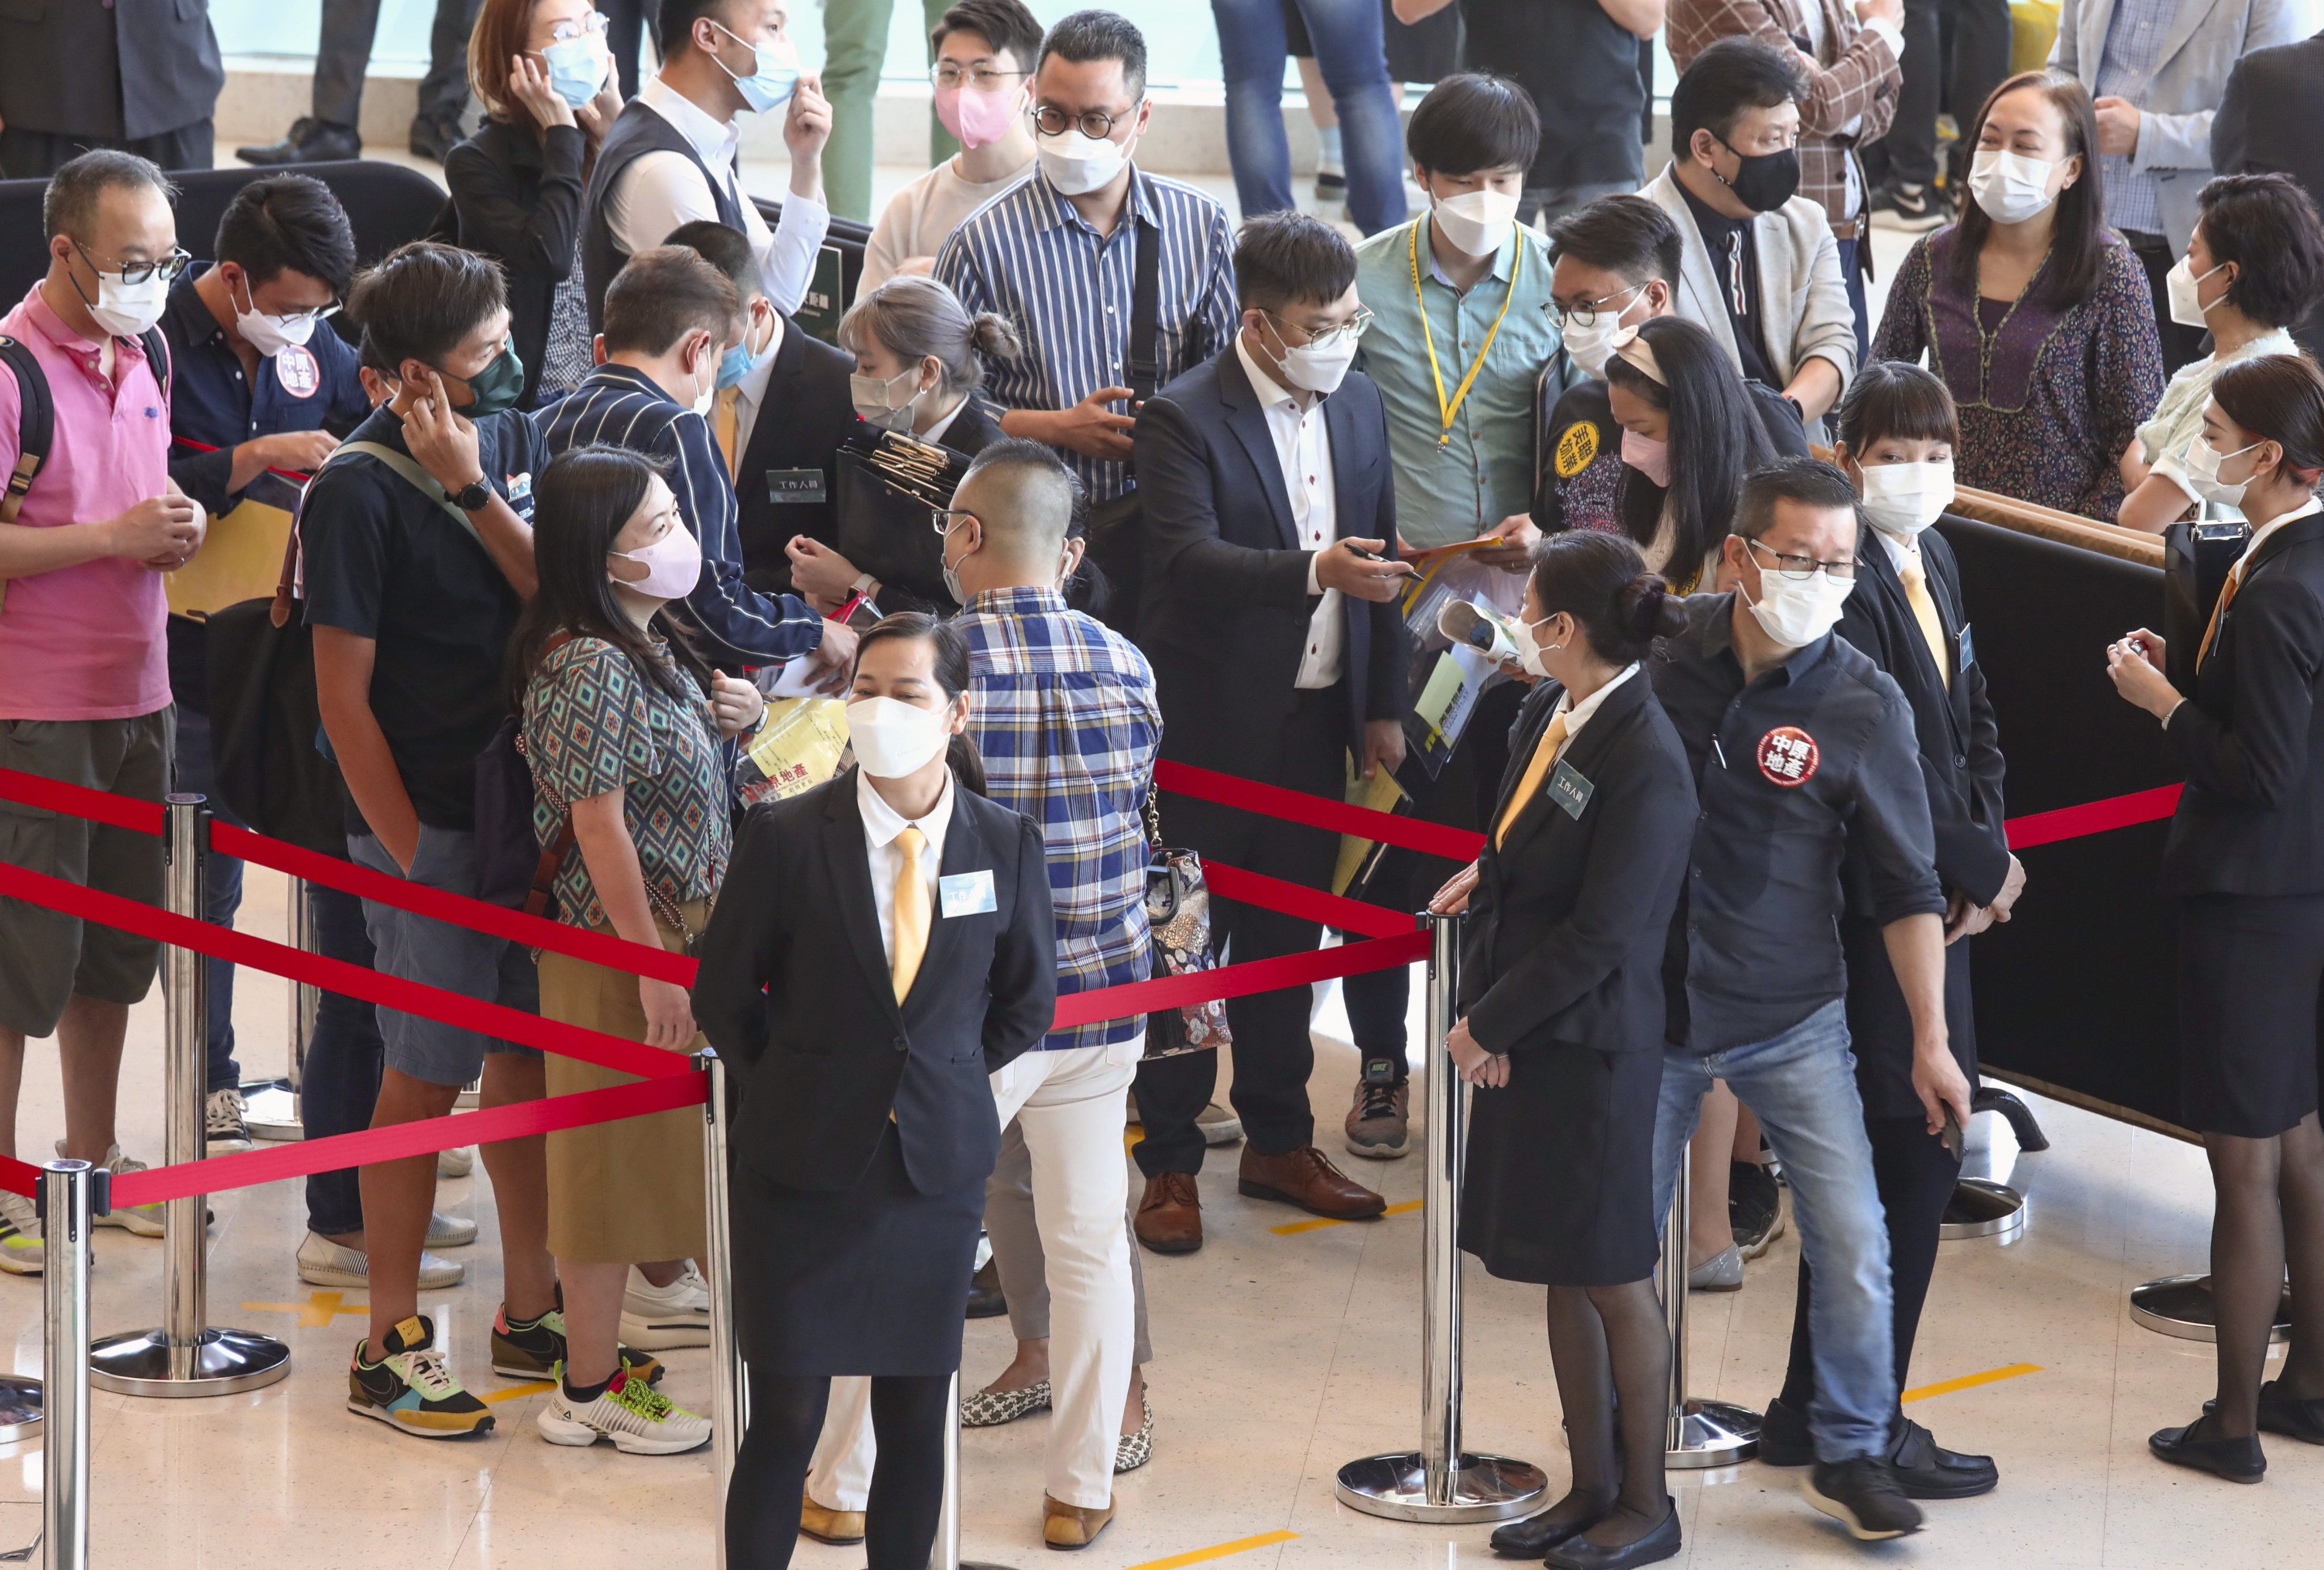 Homebuyers queued up for phase one of Grande Jete apartments in Tuen Mun at the Hung Hom sales office of CK Asset Holdings and Sun Hung Kai Properties (SHKP) on 25 June 2022. Photo: Jonathan Wong